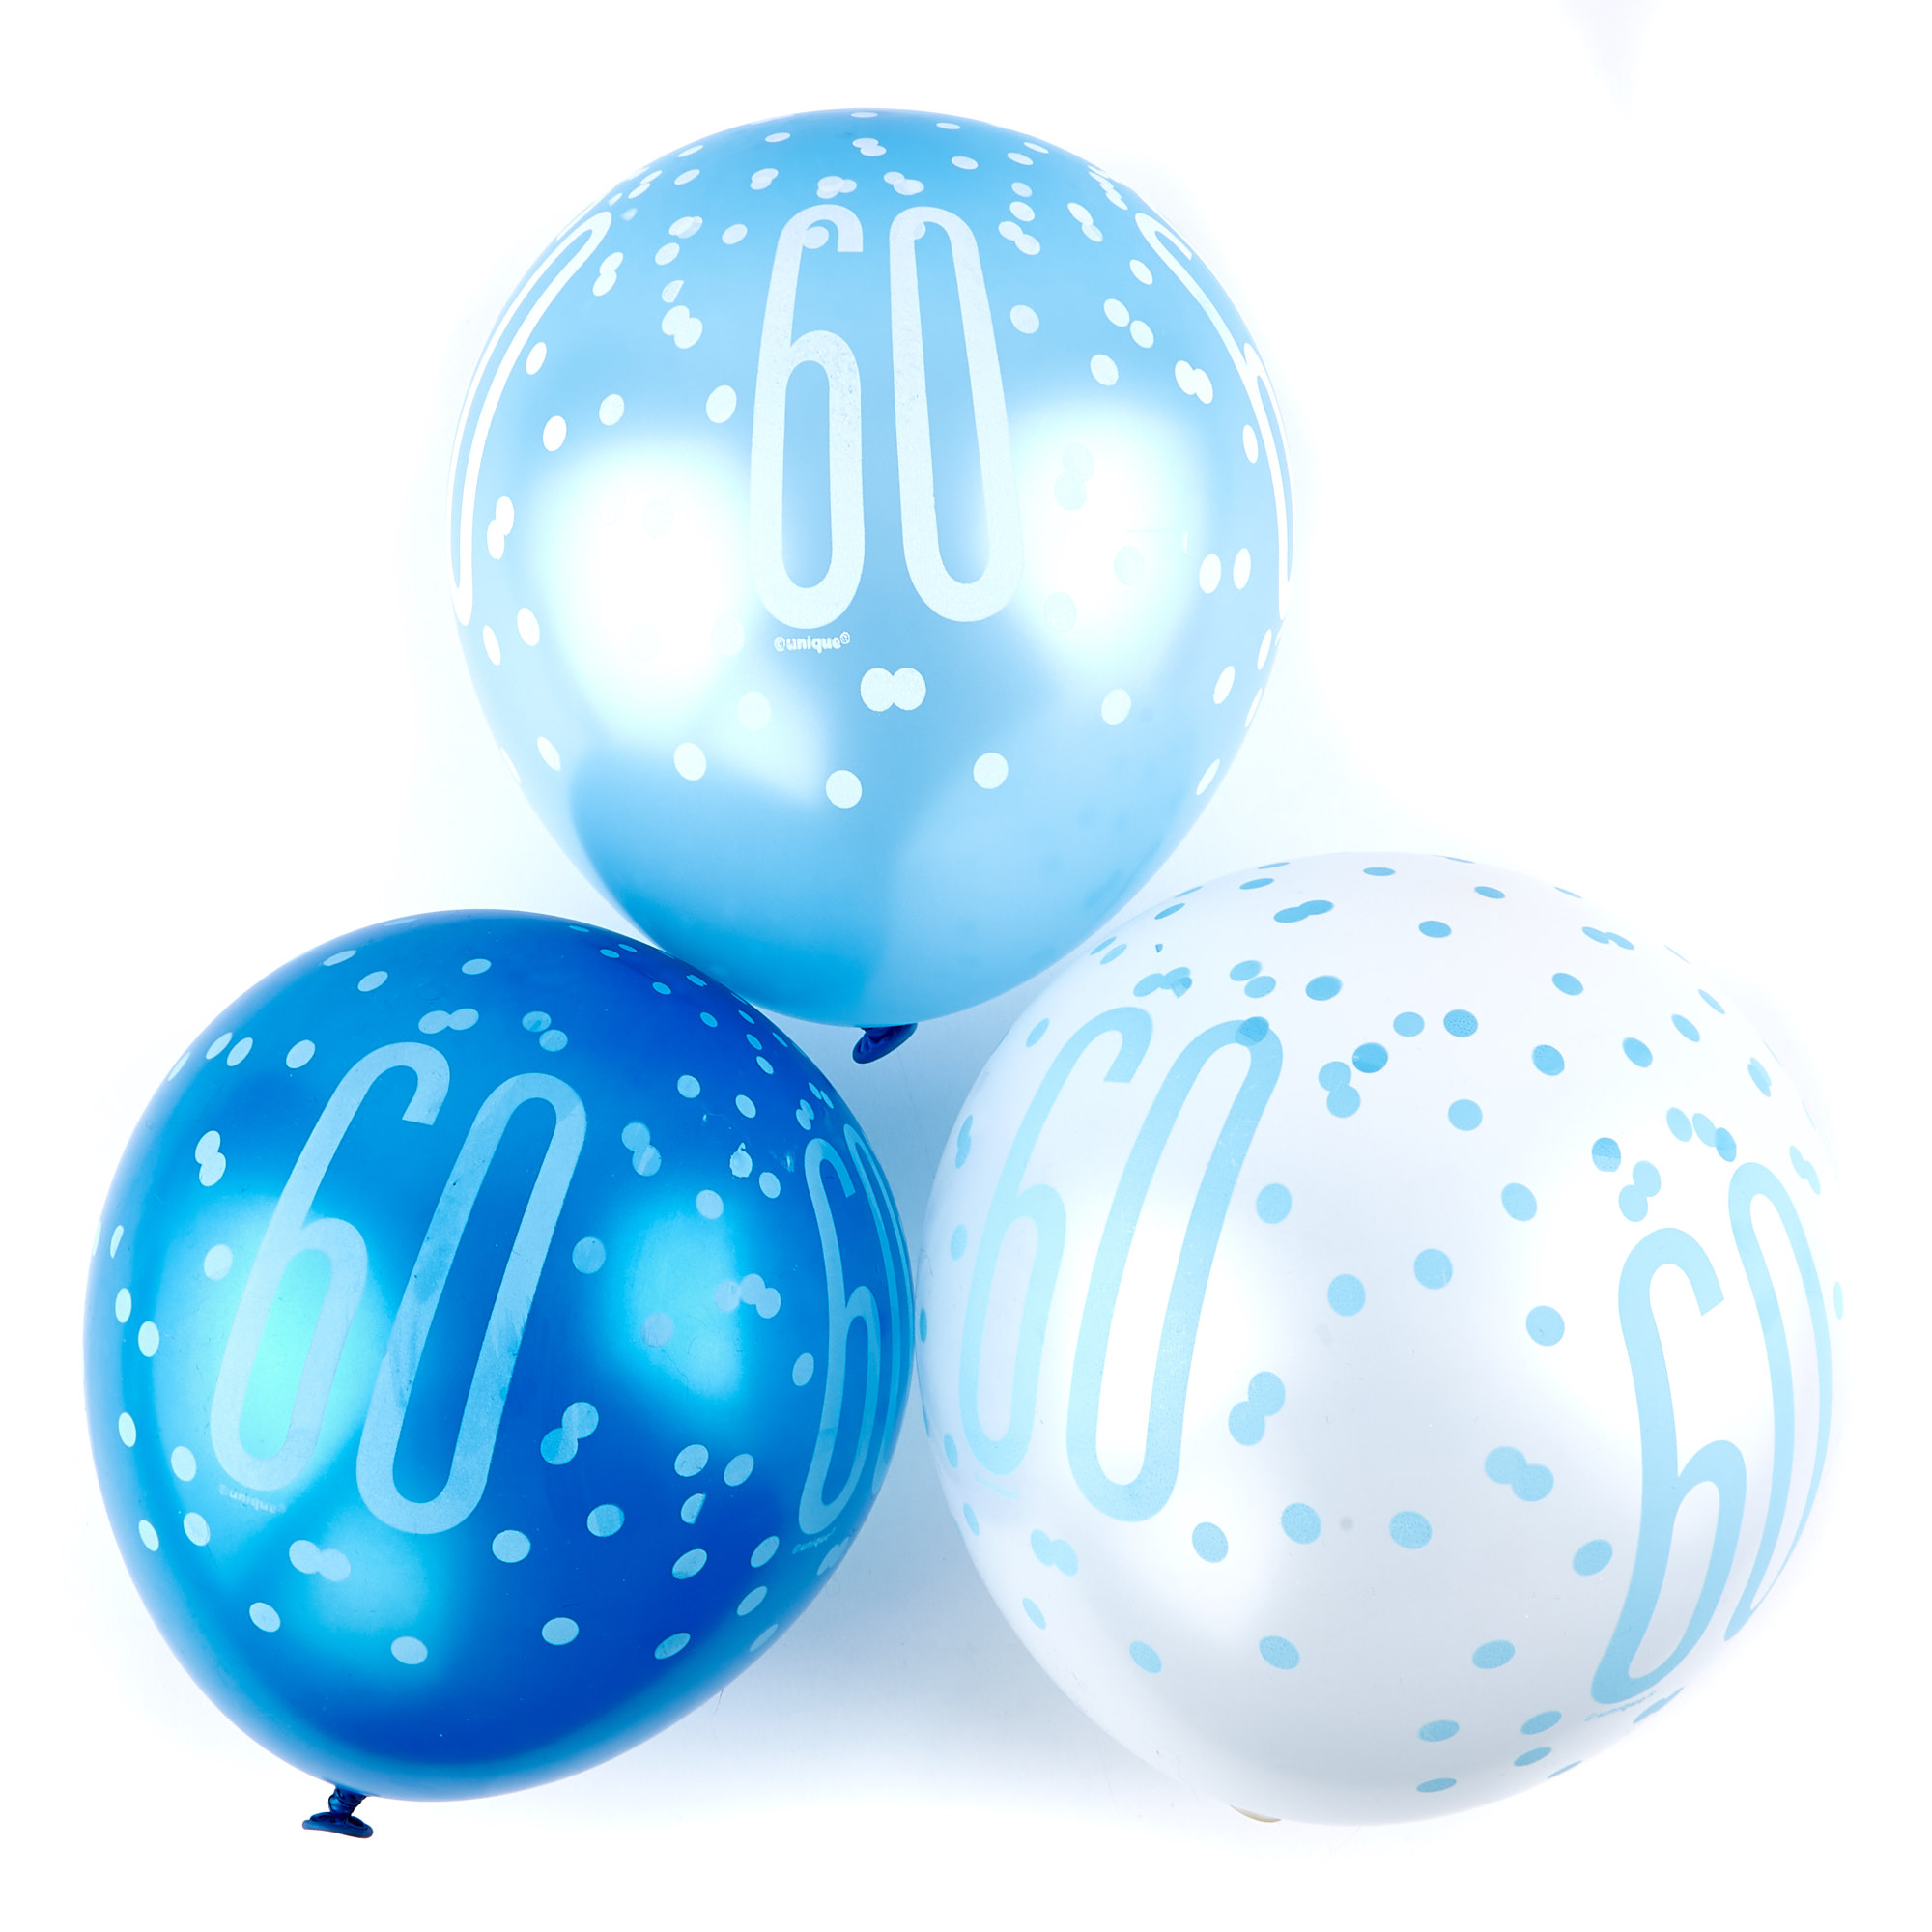 Blue 60th Birthday Party Tableware & Decorations Bundle - 16 Guests